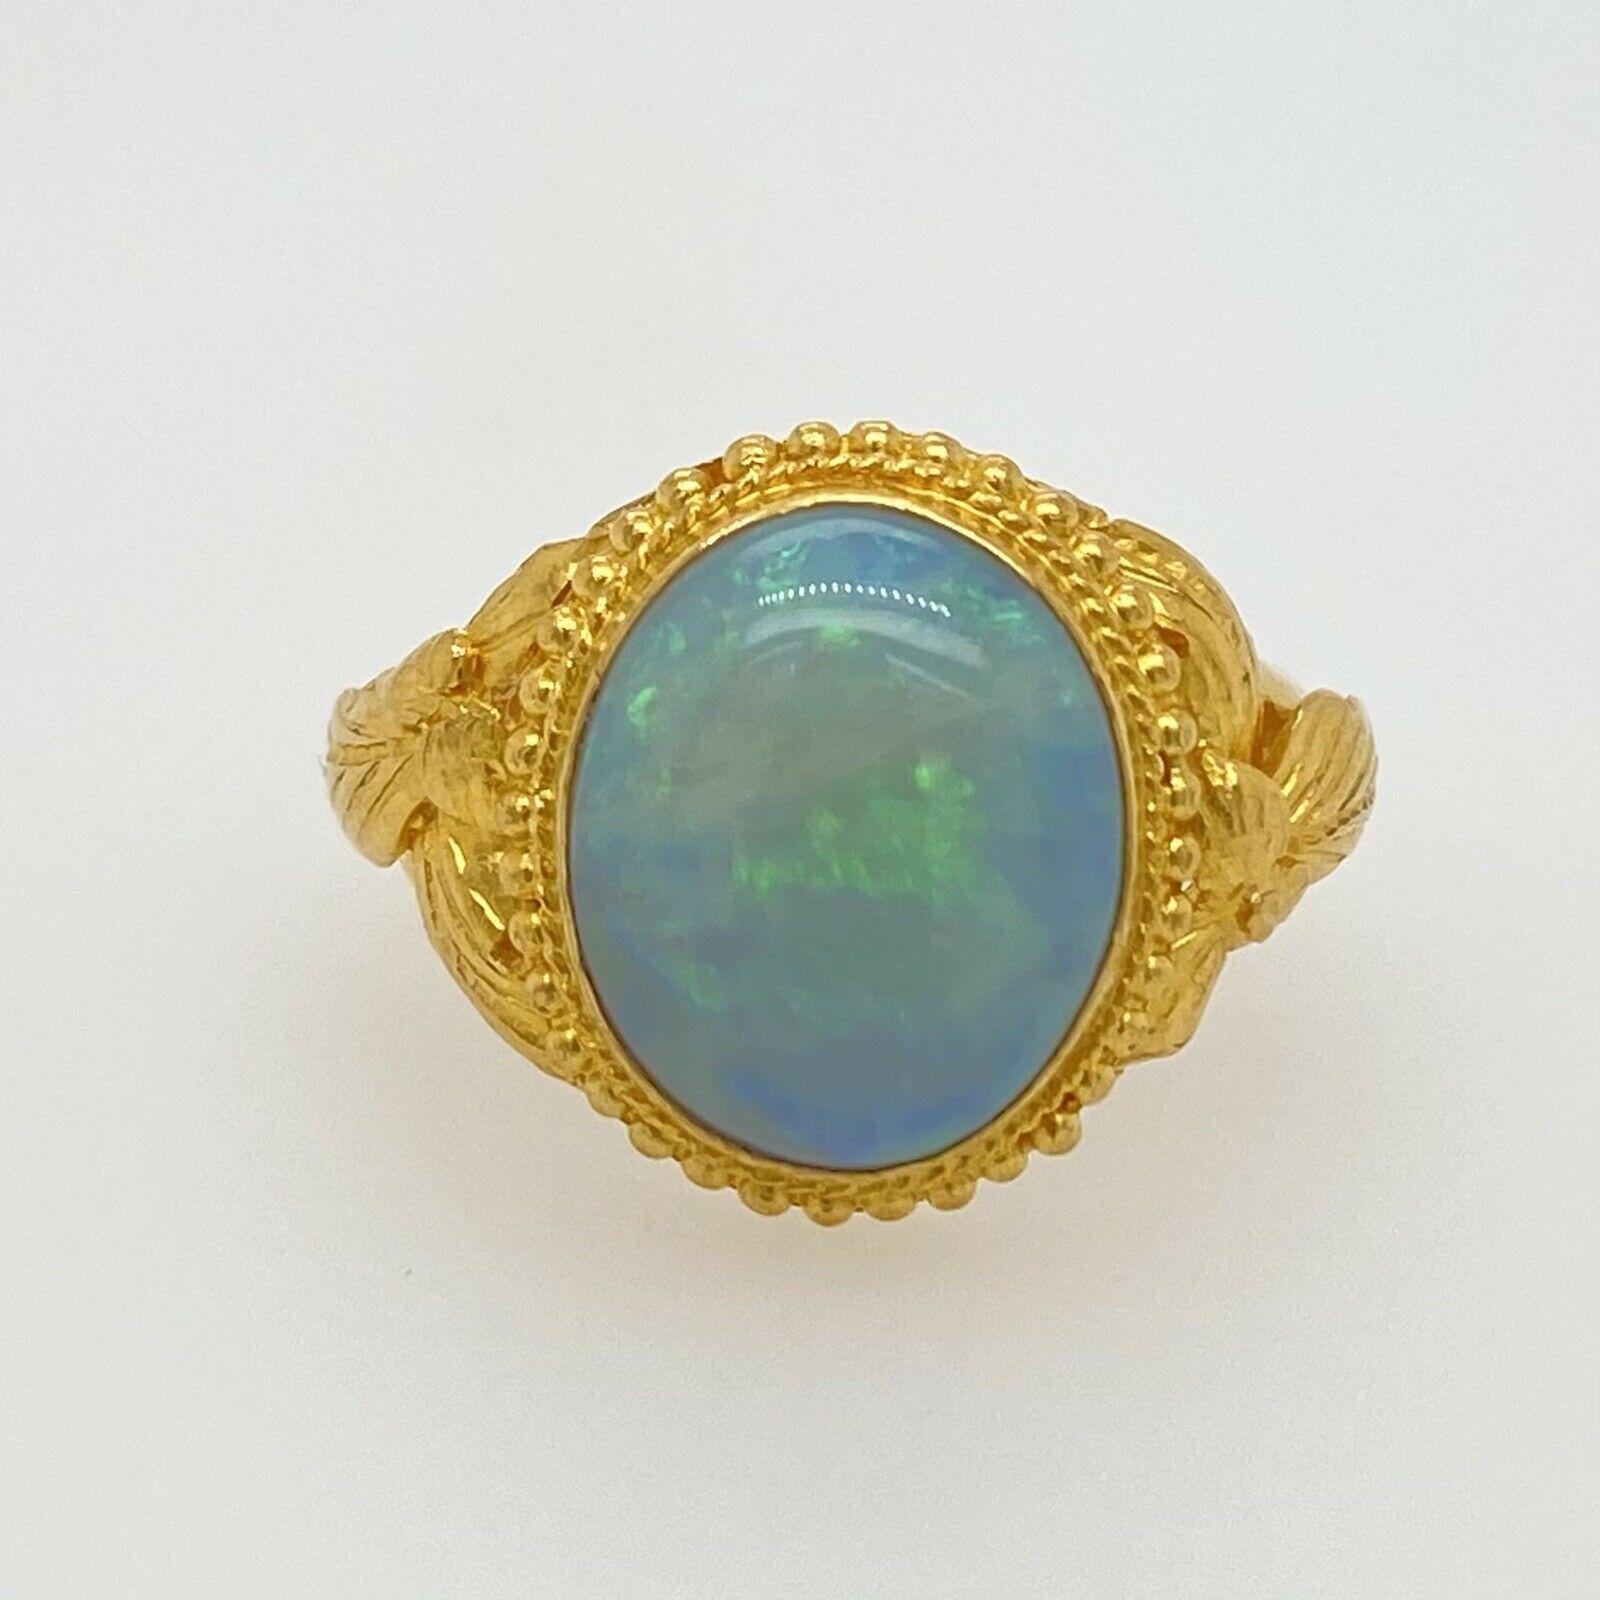 Cabochon Vintage Solid 24 Karat Yellow Gold and Opal Ring 5.9g